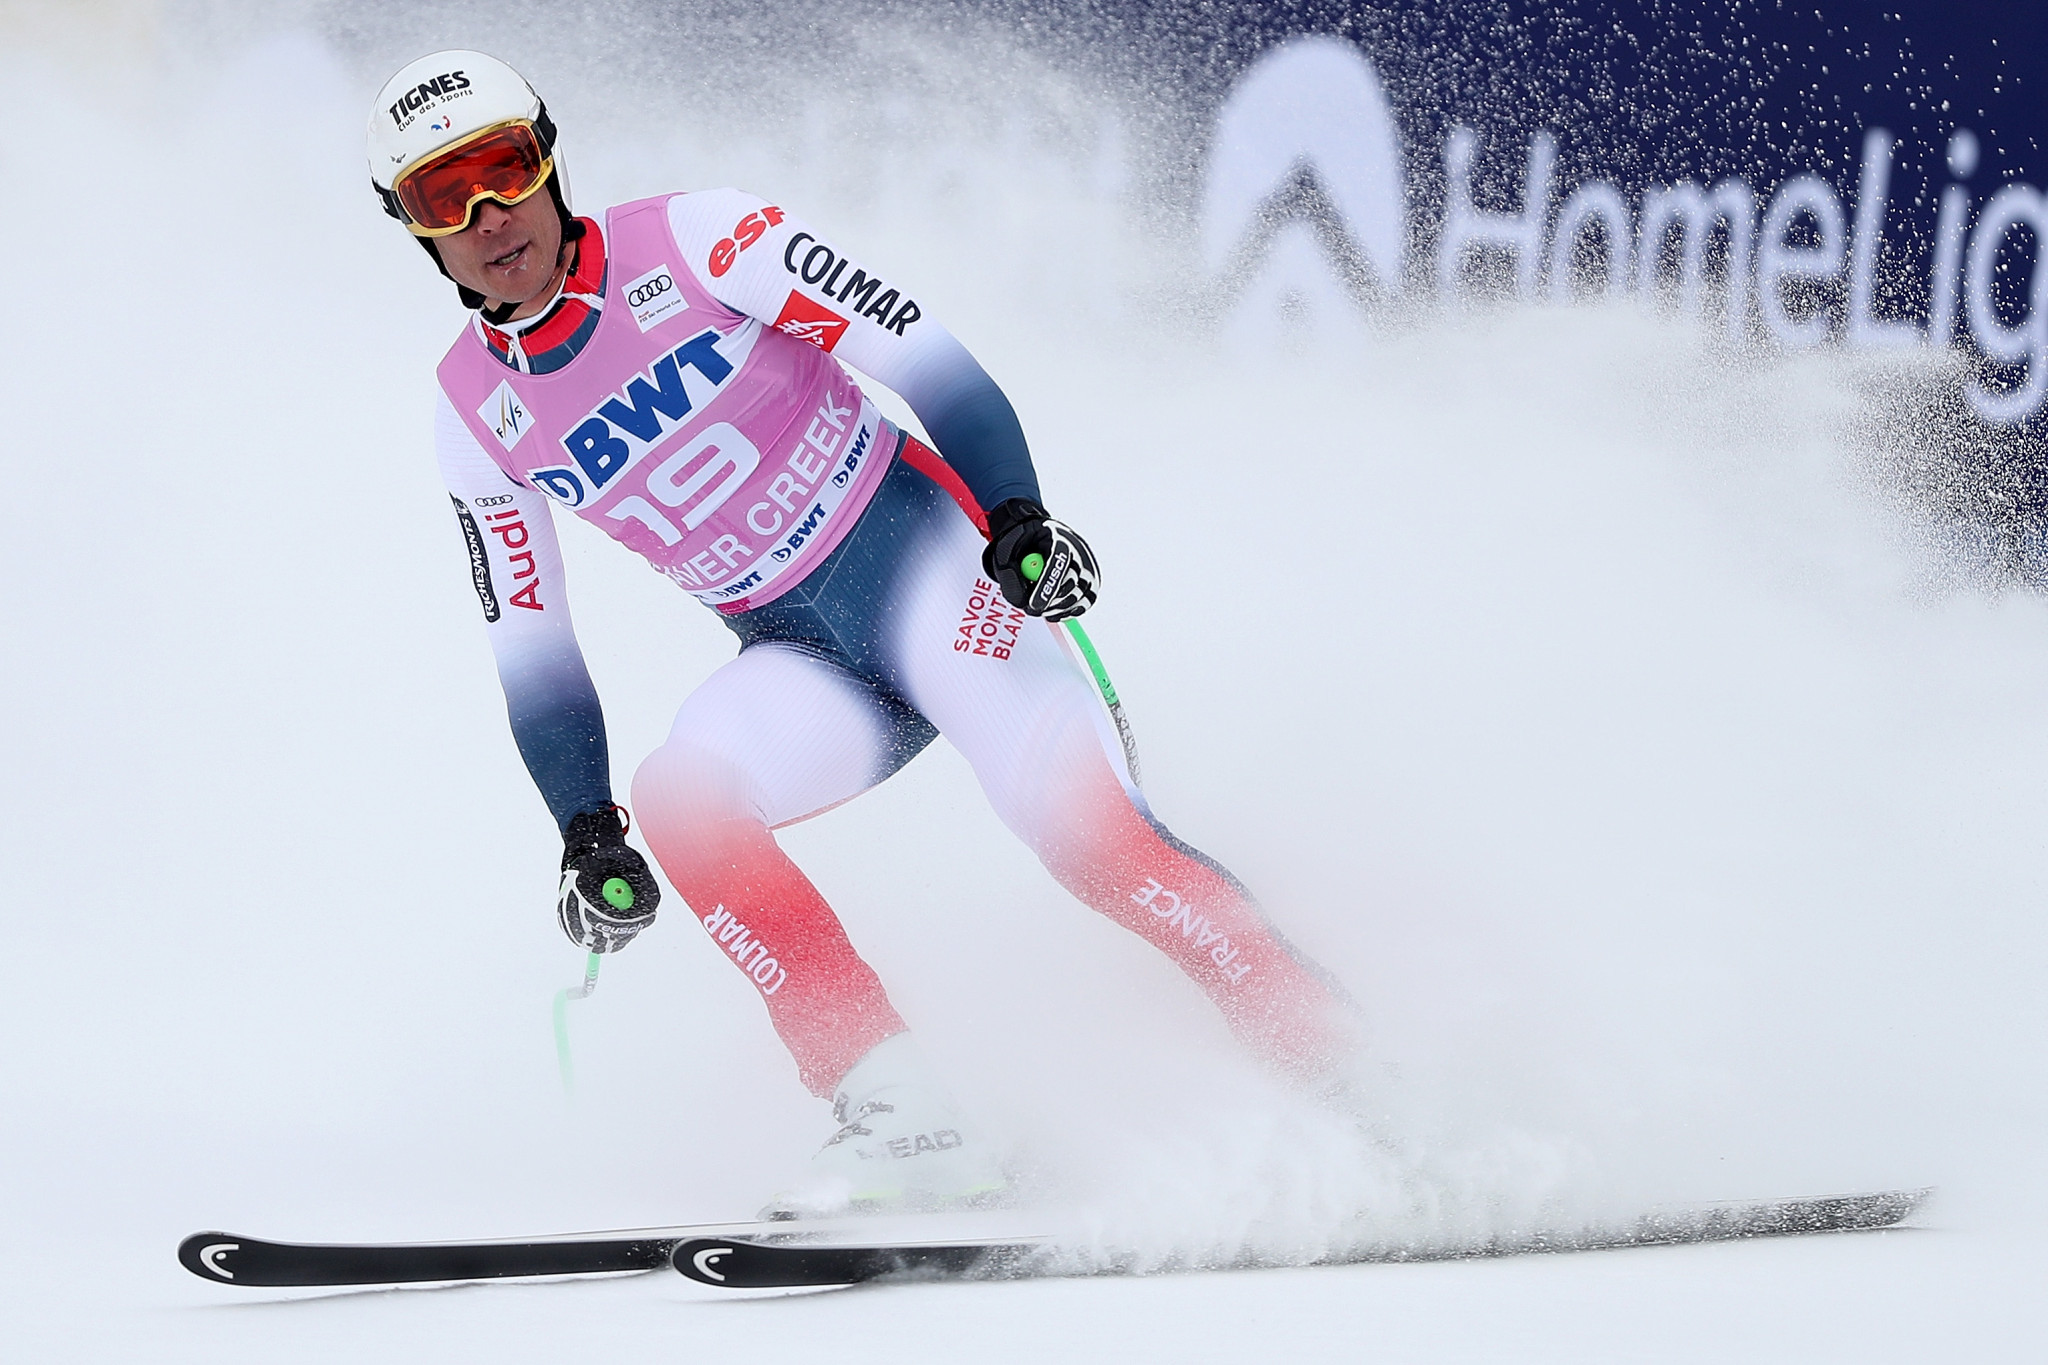 France's Johan Clarey finishes the downhill at the FIS Alpine World Cup in Beaver Creek in joint-second place ©Getty Images